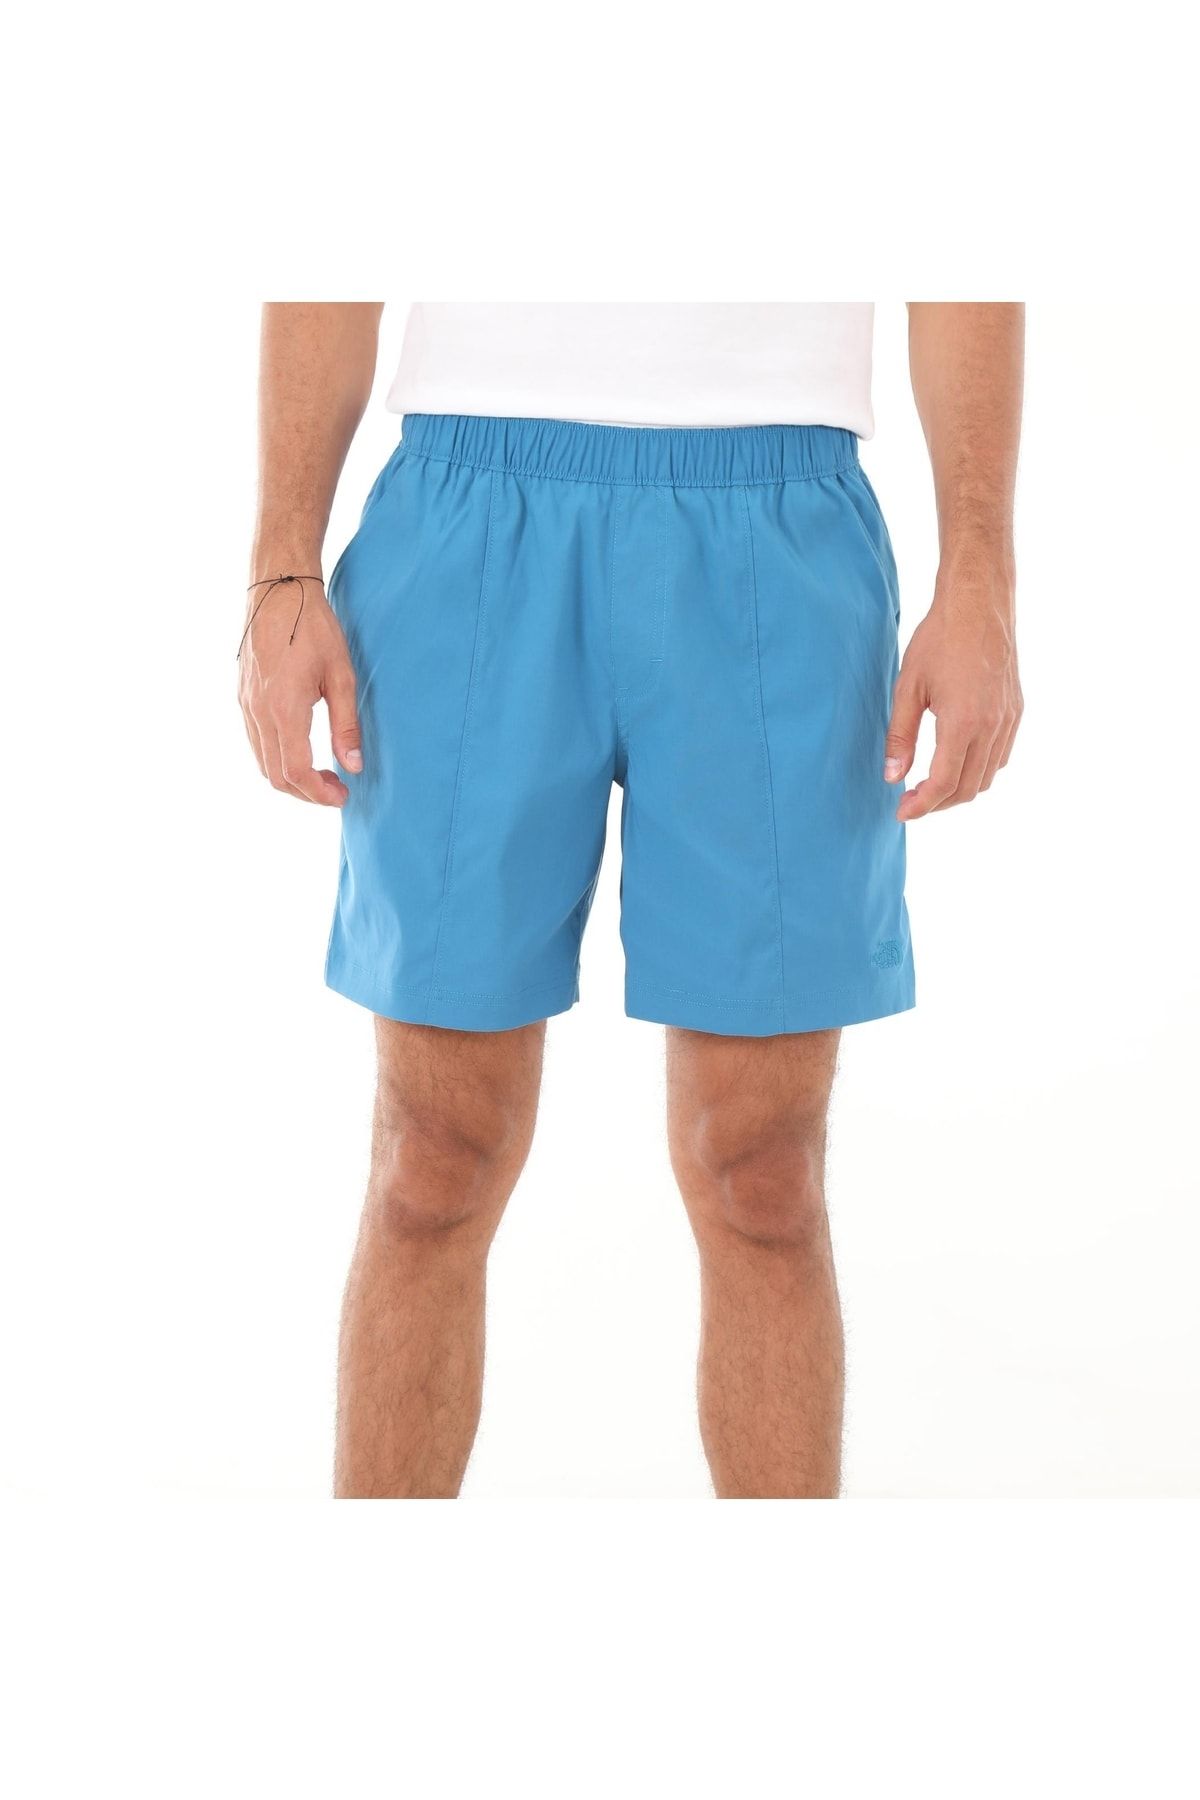 The North Face M Class V Pull On Short Nf0a5a5xm191